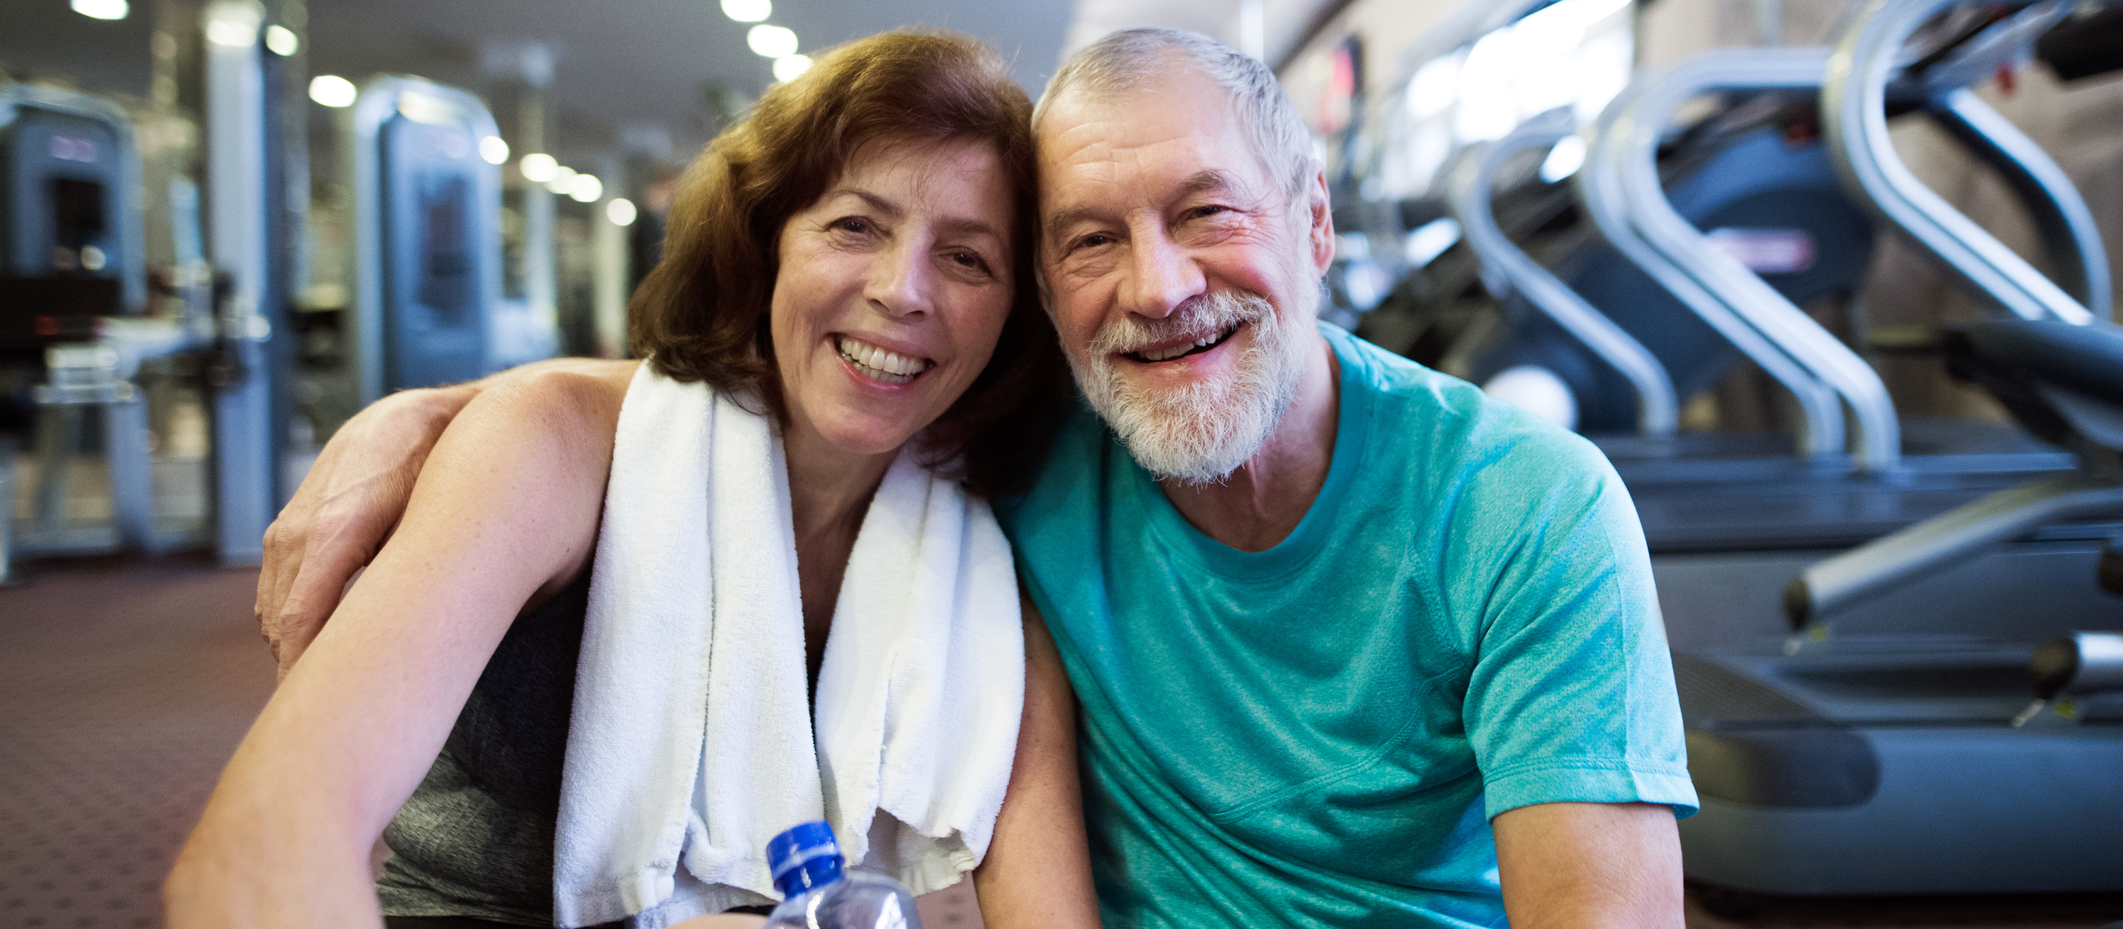 Staying Fit As We Age